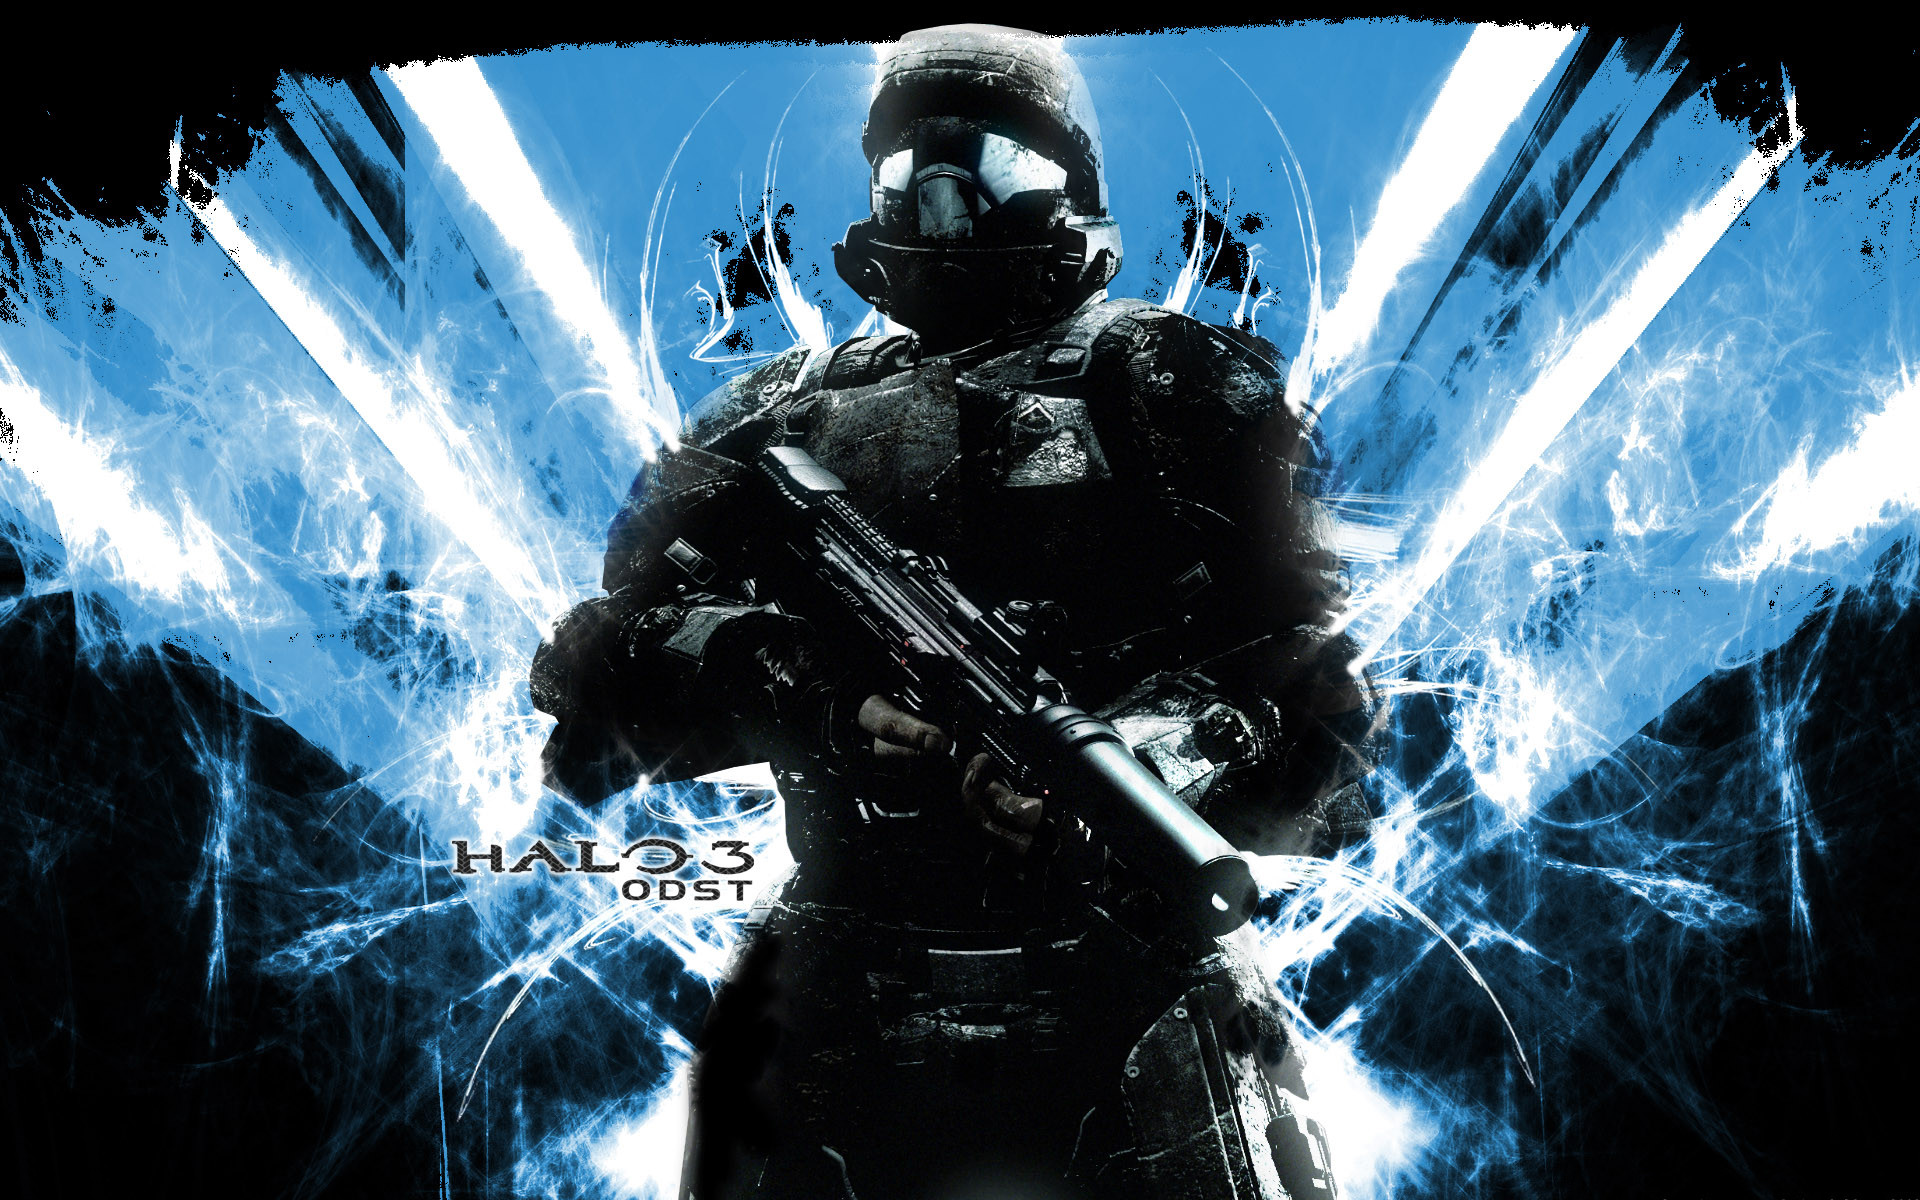 Halo 3 Odst Sticky Grenade Wallpaper ~ Halo Games Wallpapers Res .